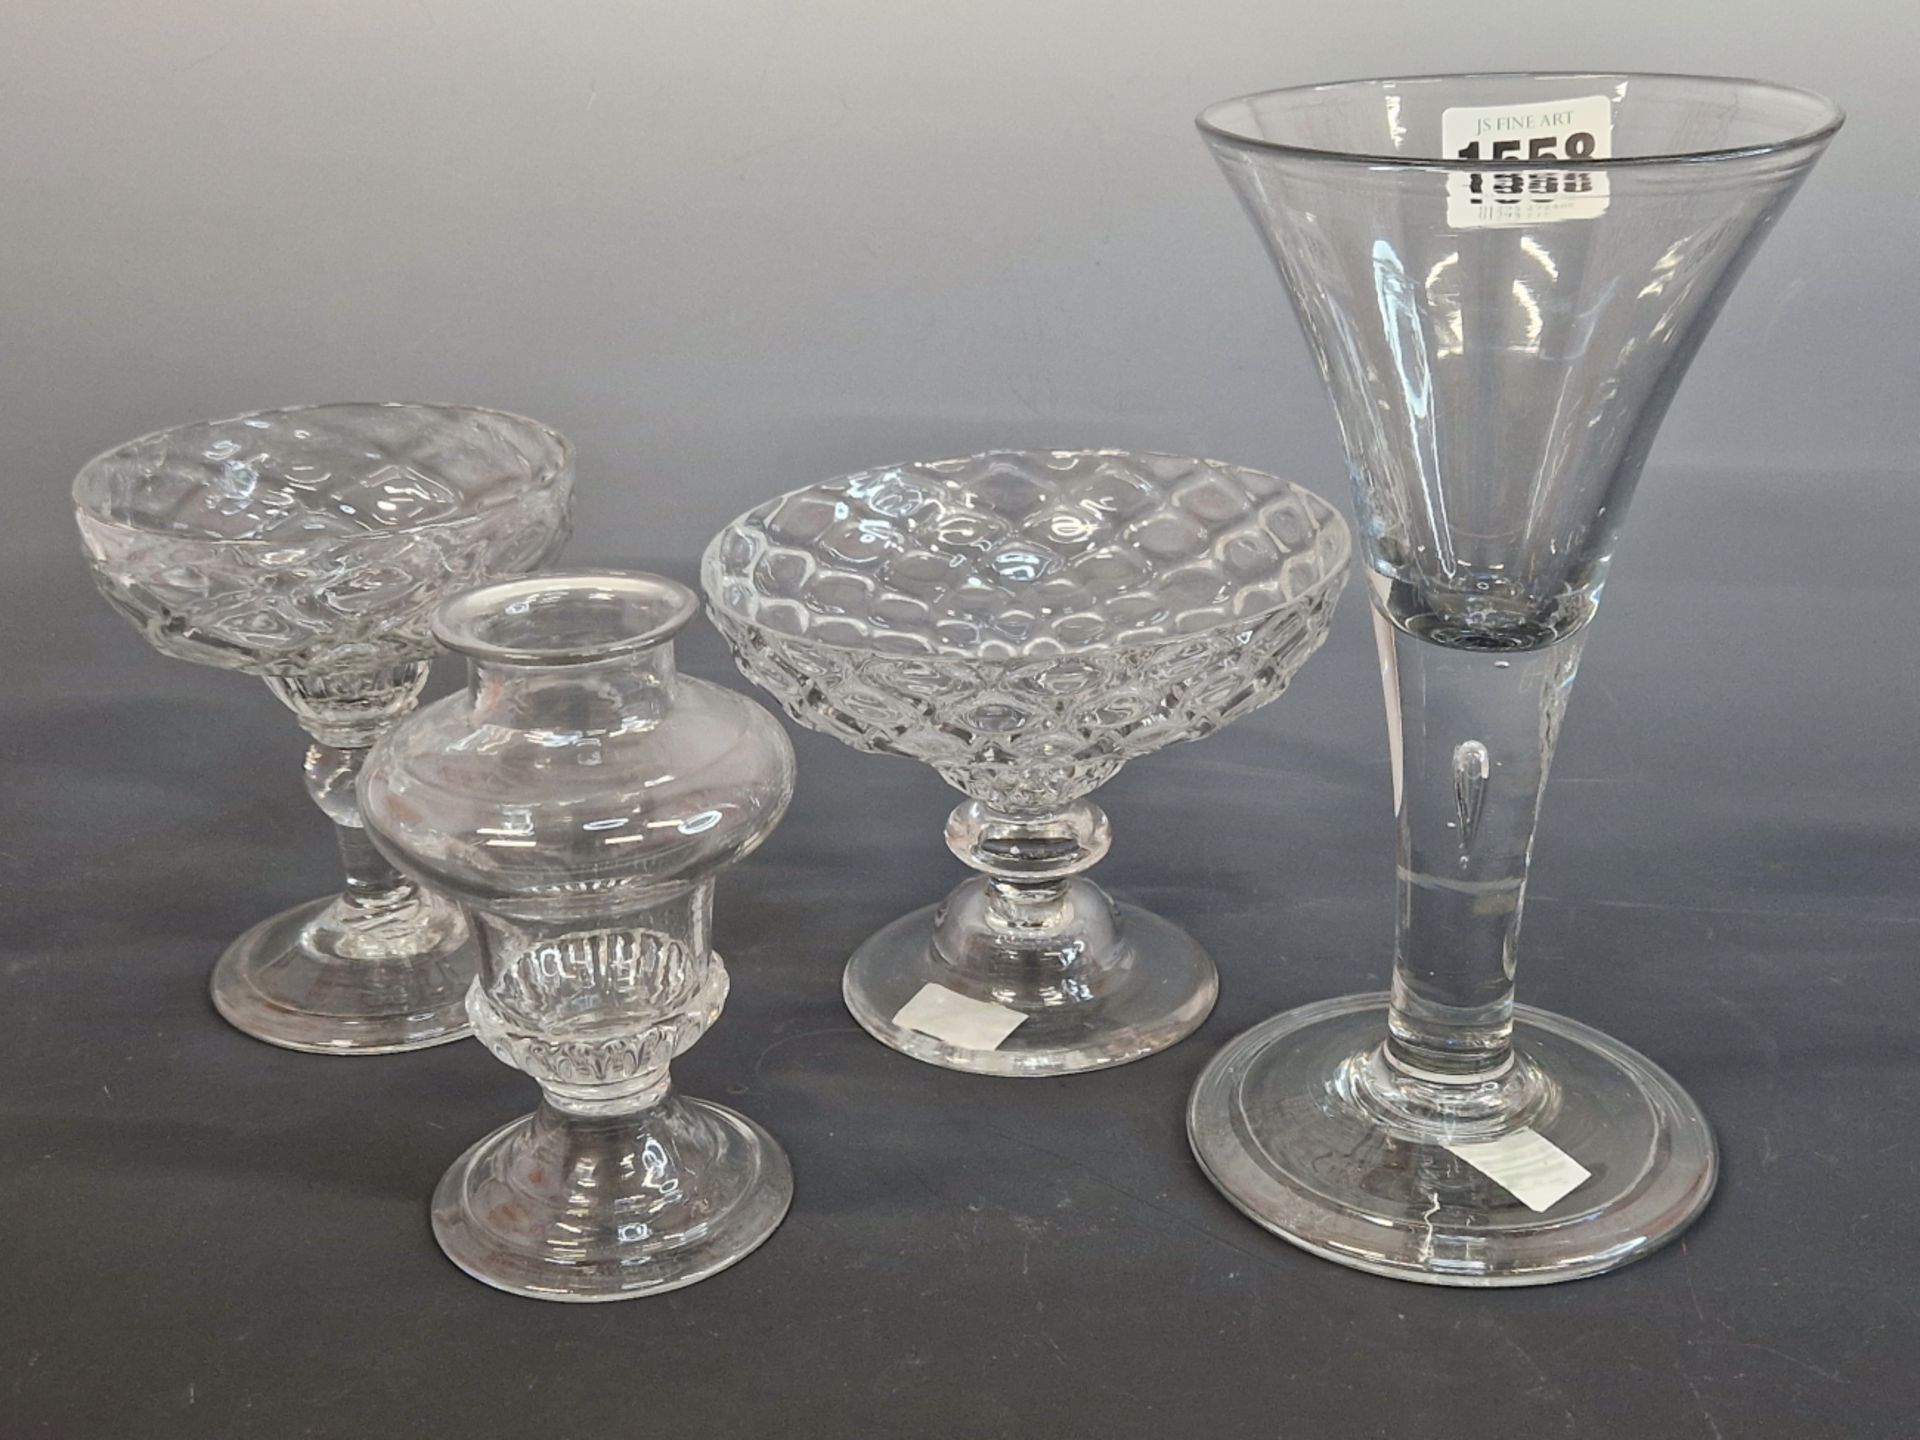 AN 18th C. ALE GLASS WITH TEARED STEM AND FOLDED FOOT, TWO GLASSES WITH DIAMOND DIAPERED BOWLS,